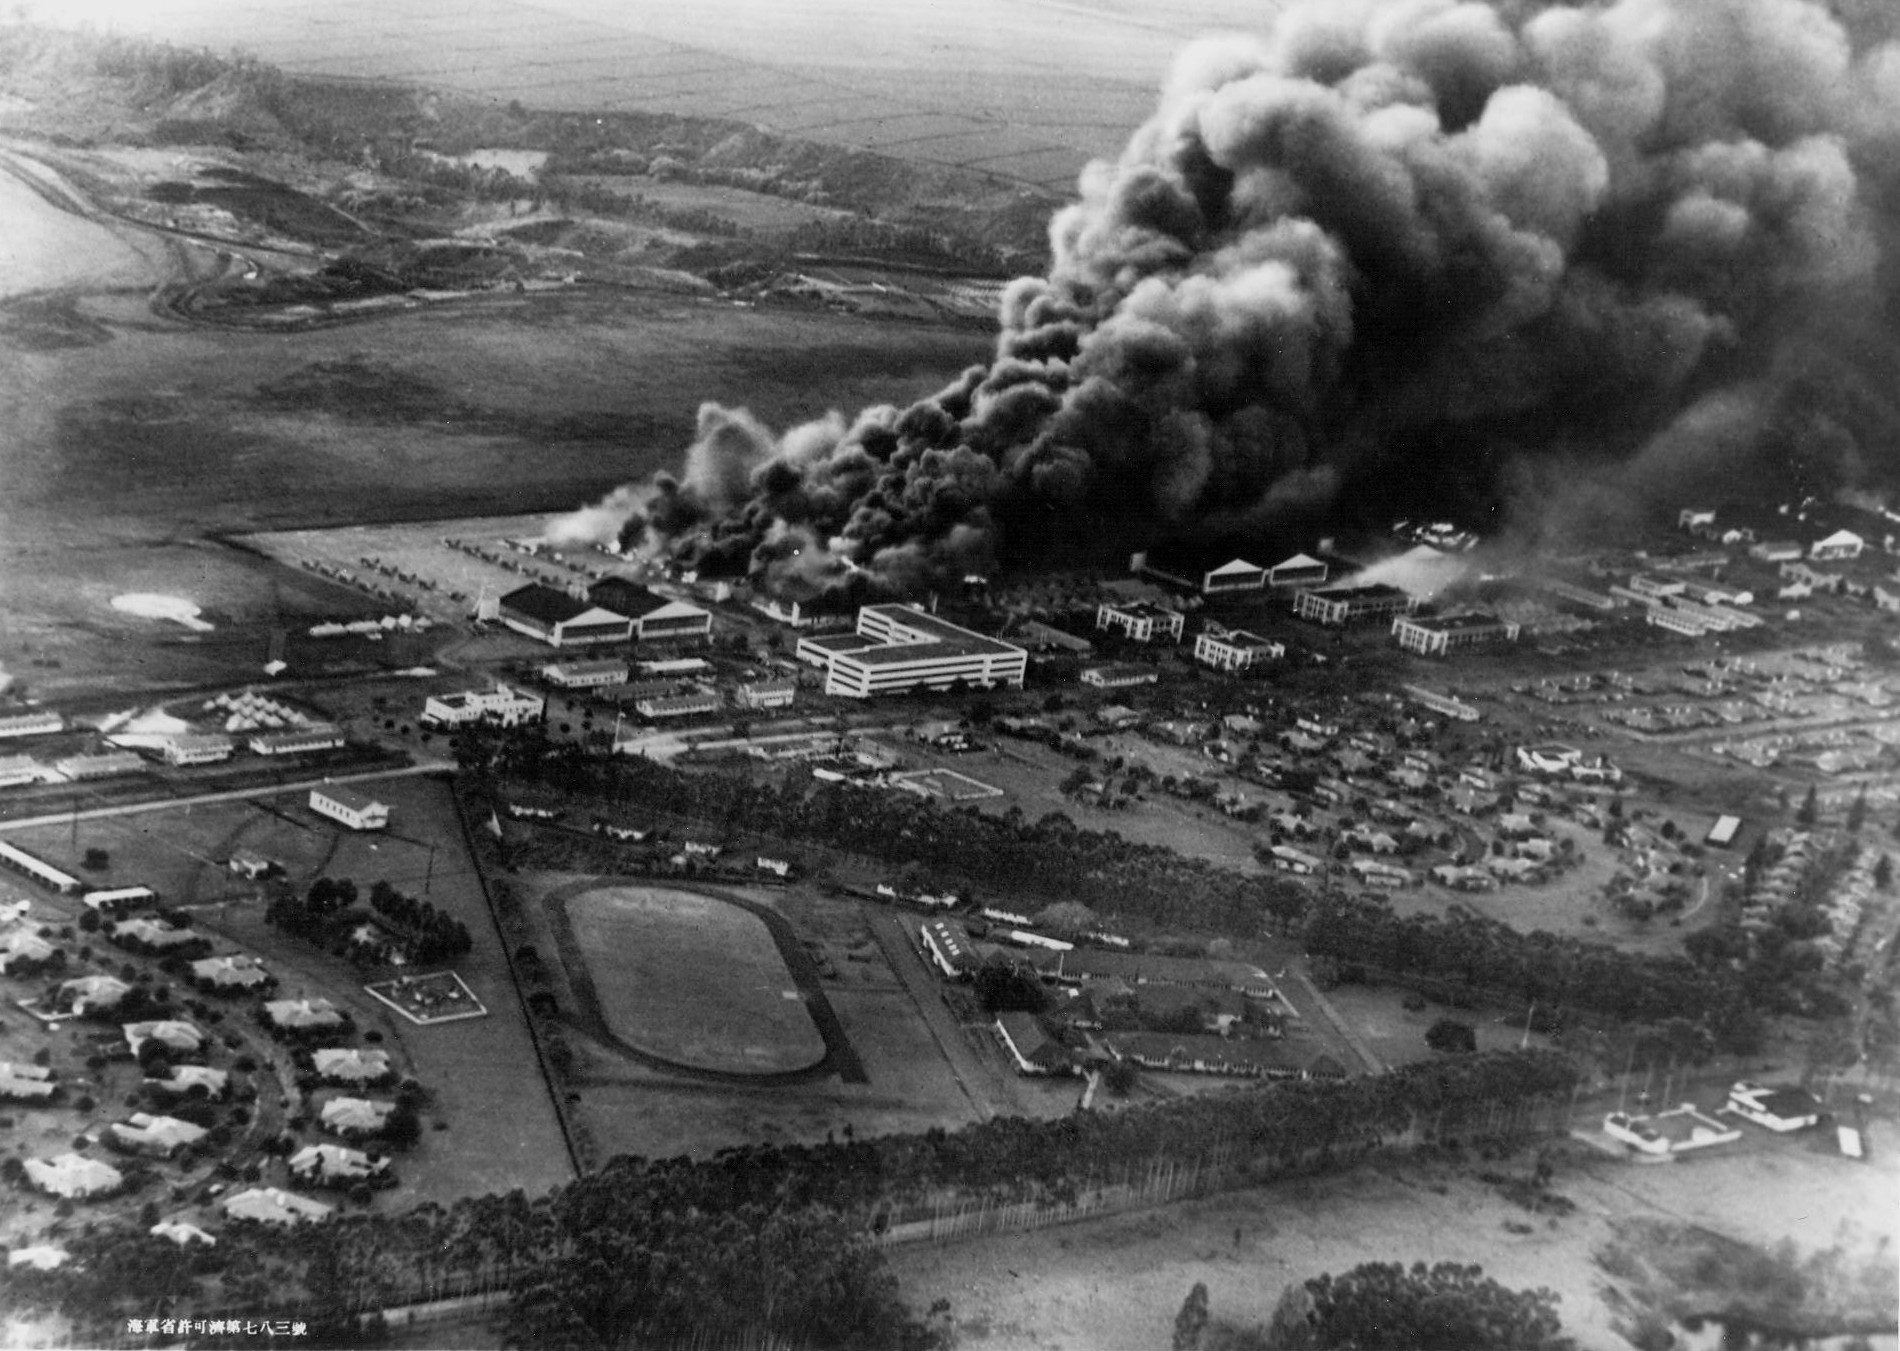 P-40 fighters and hangars burning at Wheeler Field, US Territory of Hawaii, 7 Dec 1941; photo taken from a Japanese aircraft